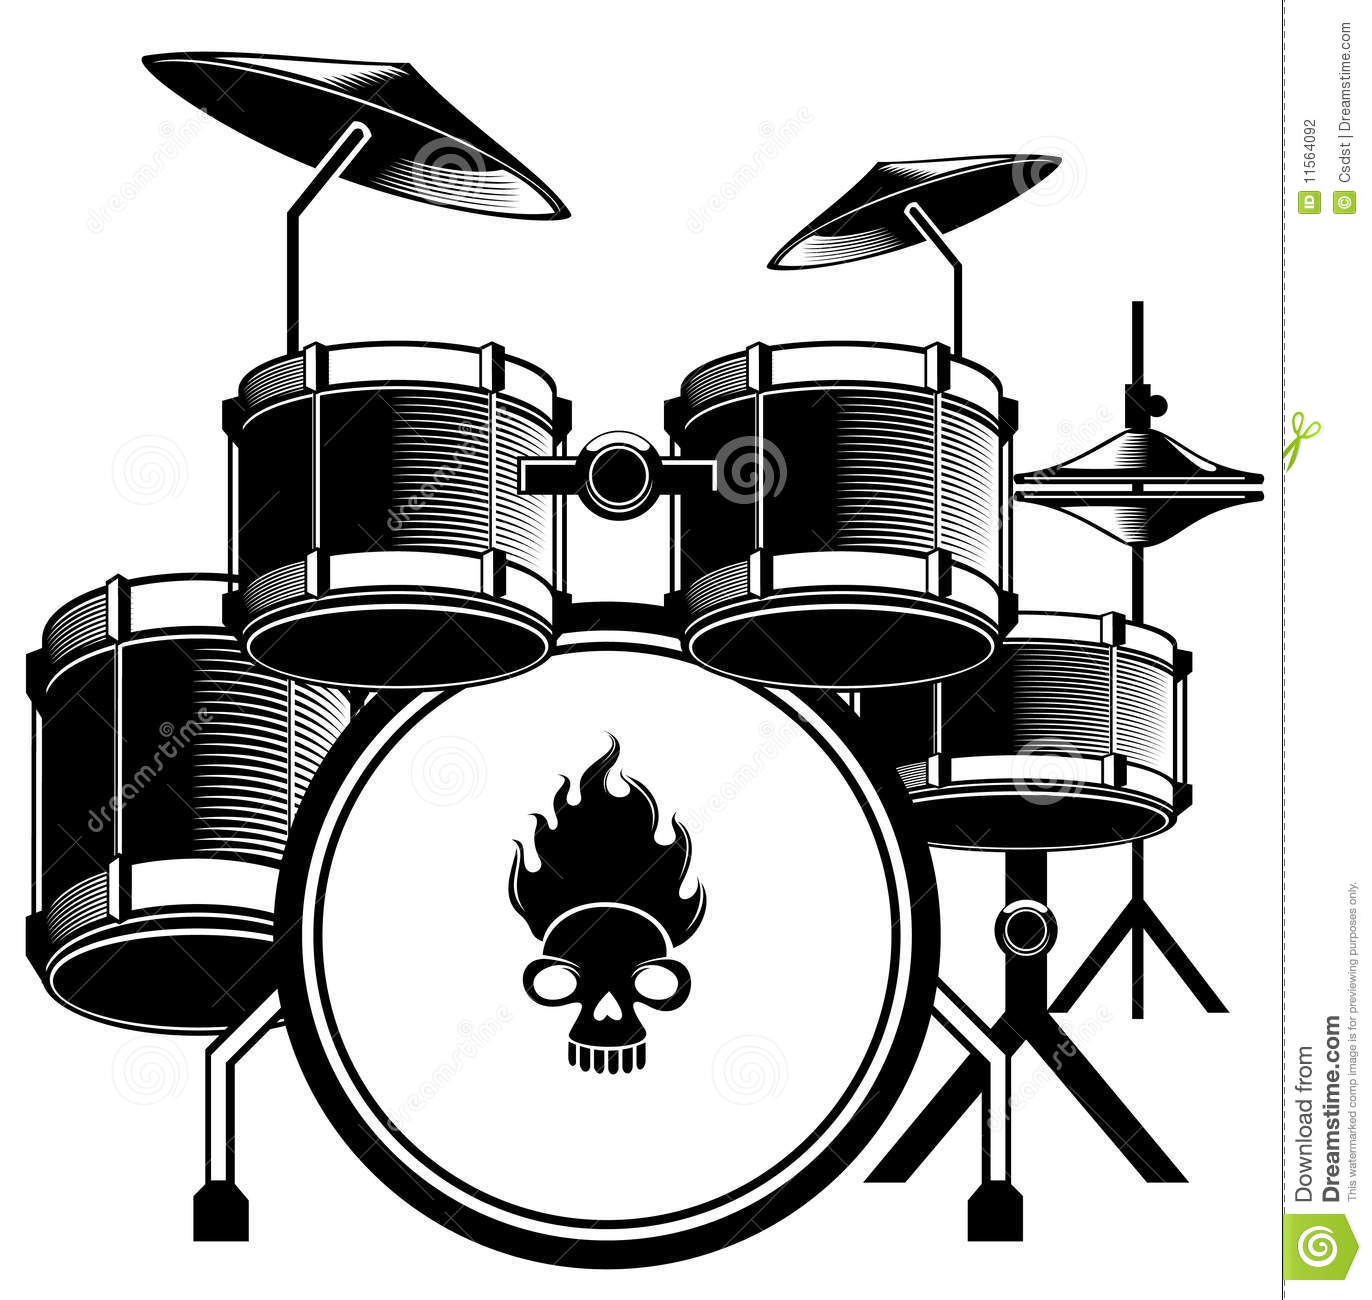 Awesome Drum Set Clipart .